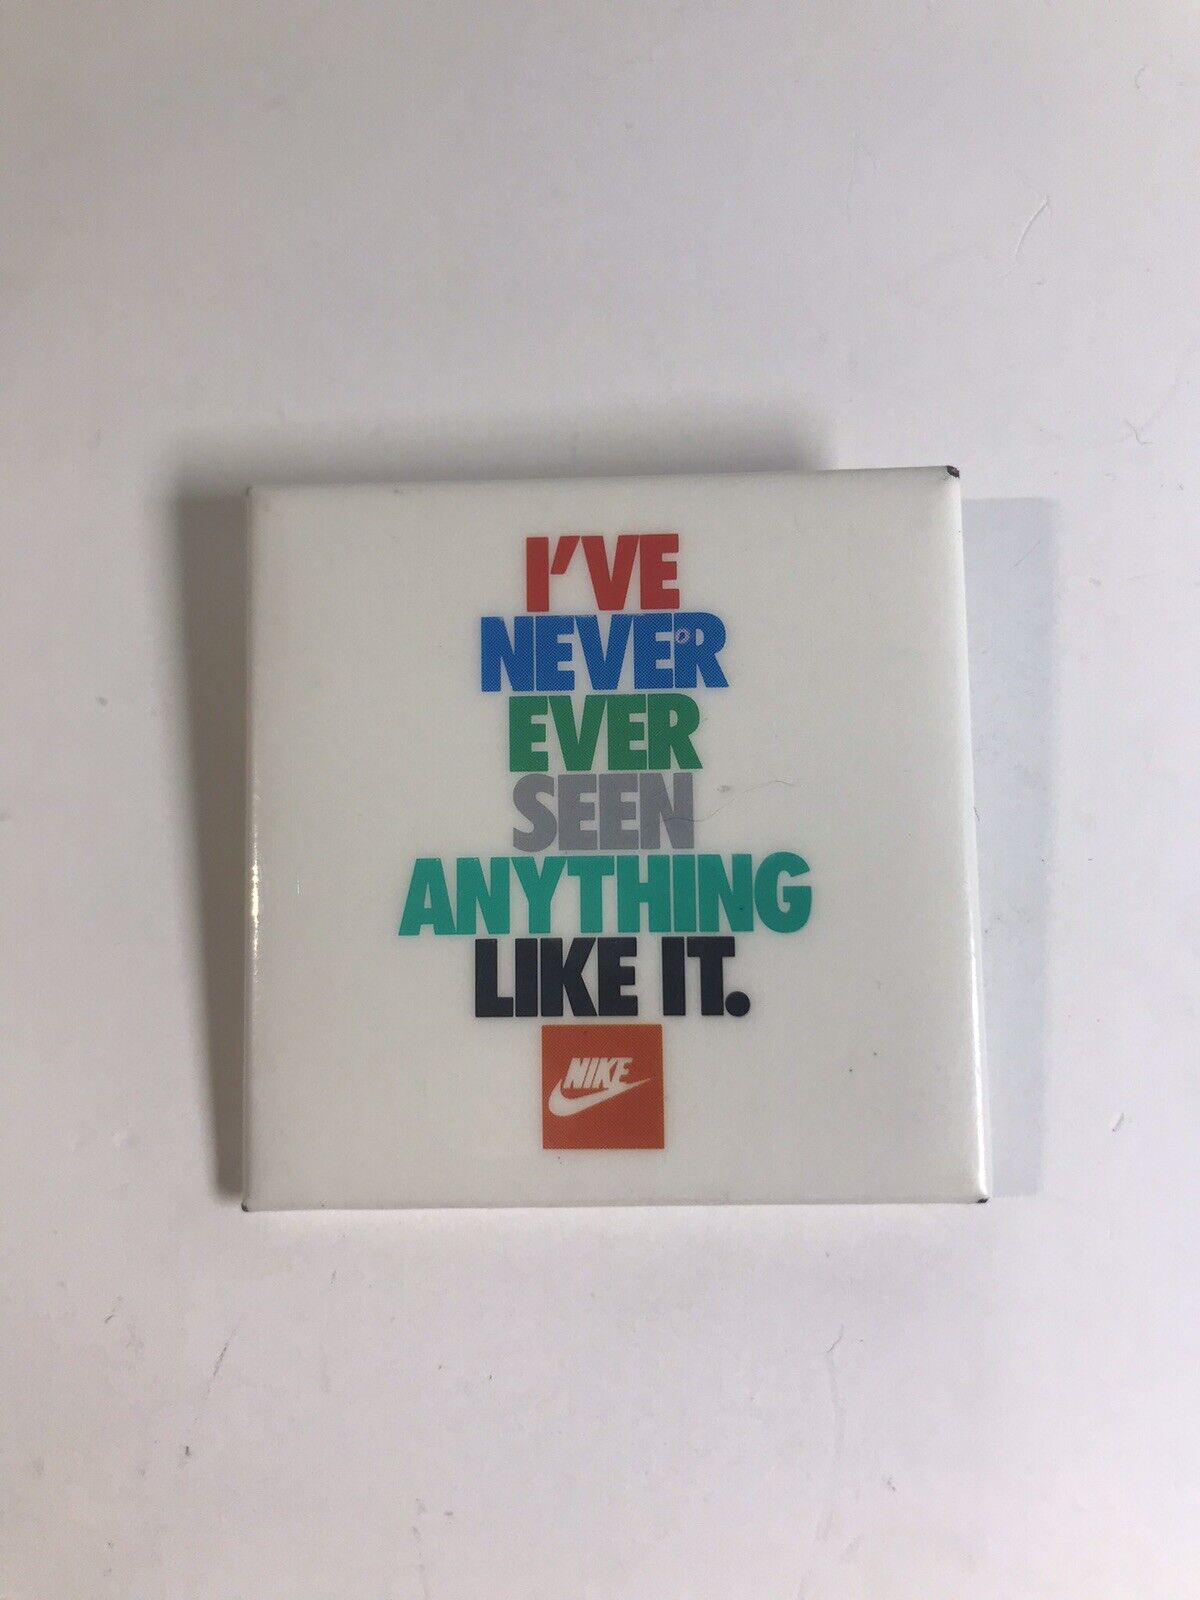 Nike Vintage Pinback Button - “I\'ve Never Ever Seen Anything Like It” 2x2 Inches